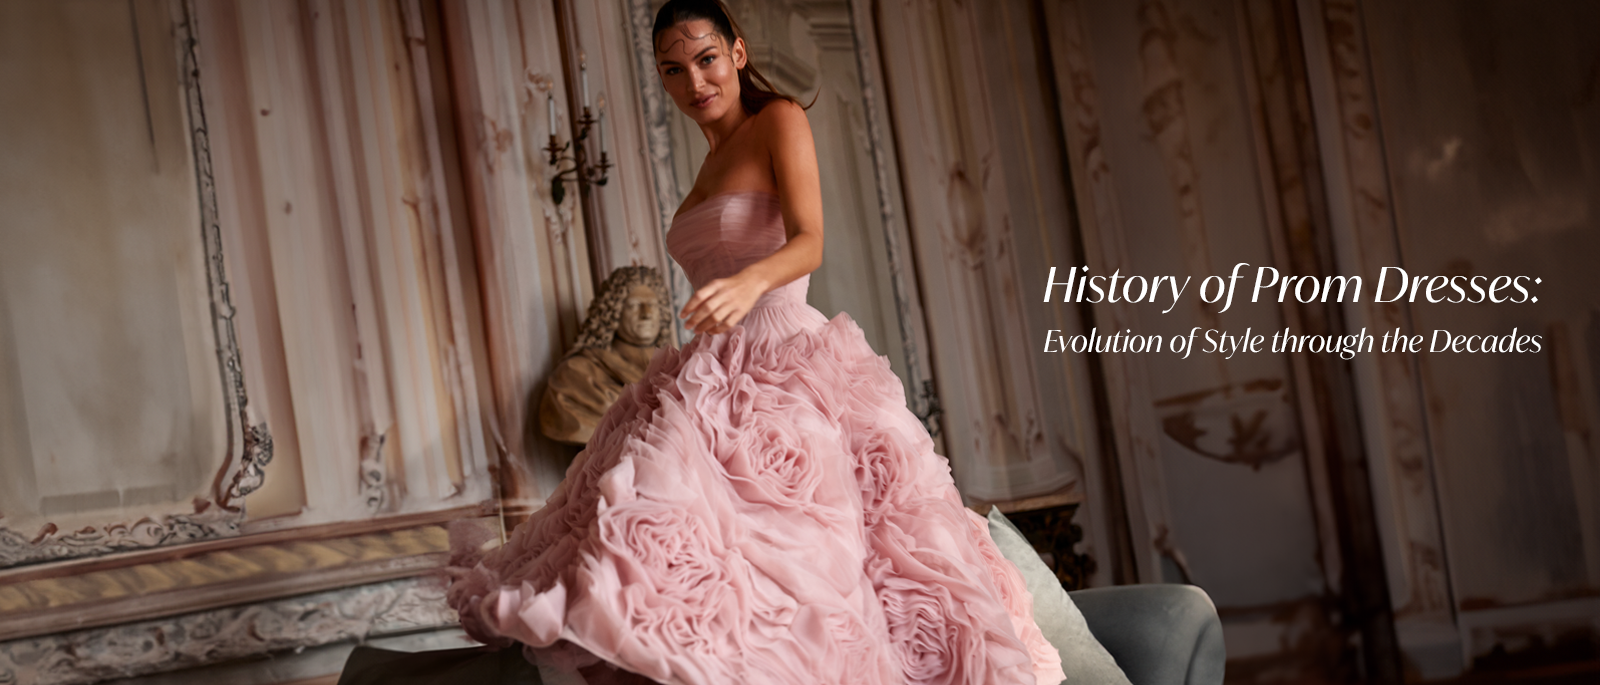 History of Prom Dresses: Evolution of Style through the Decades